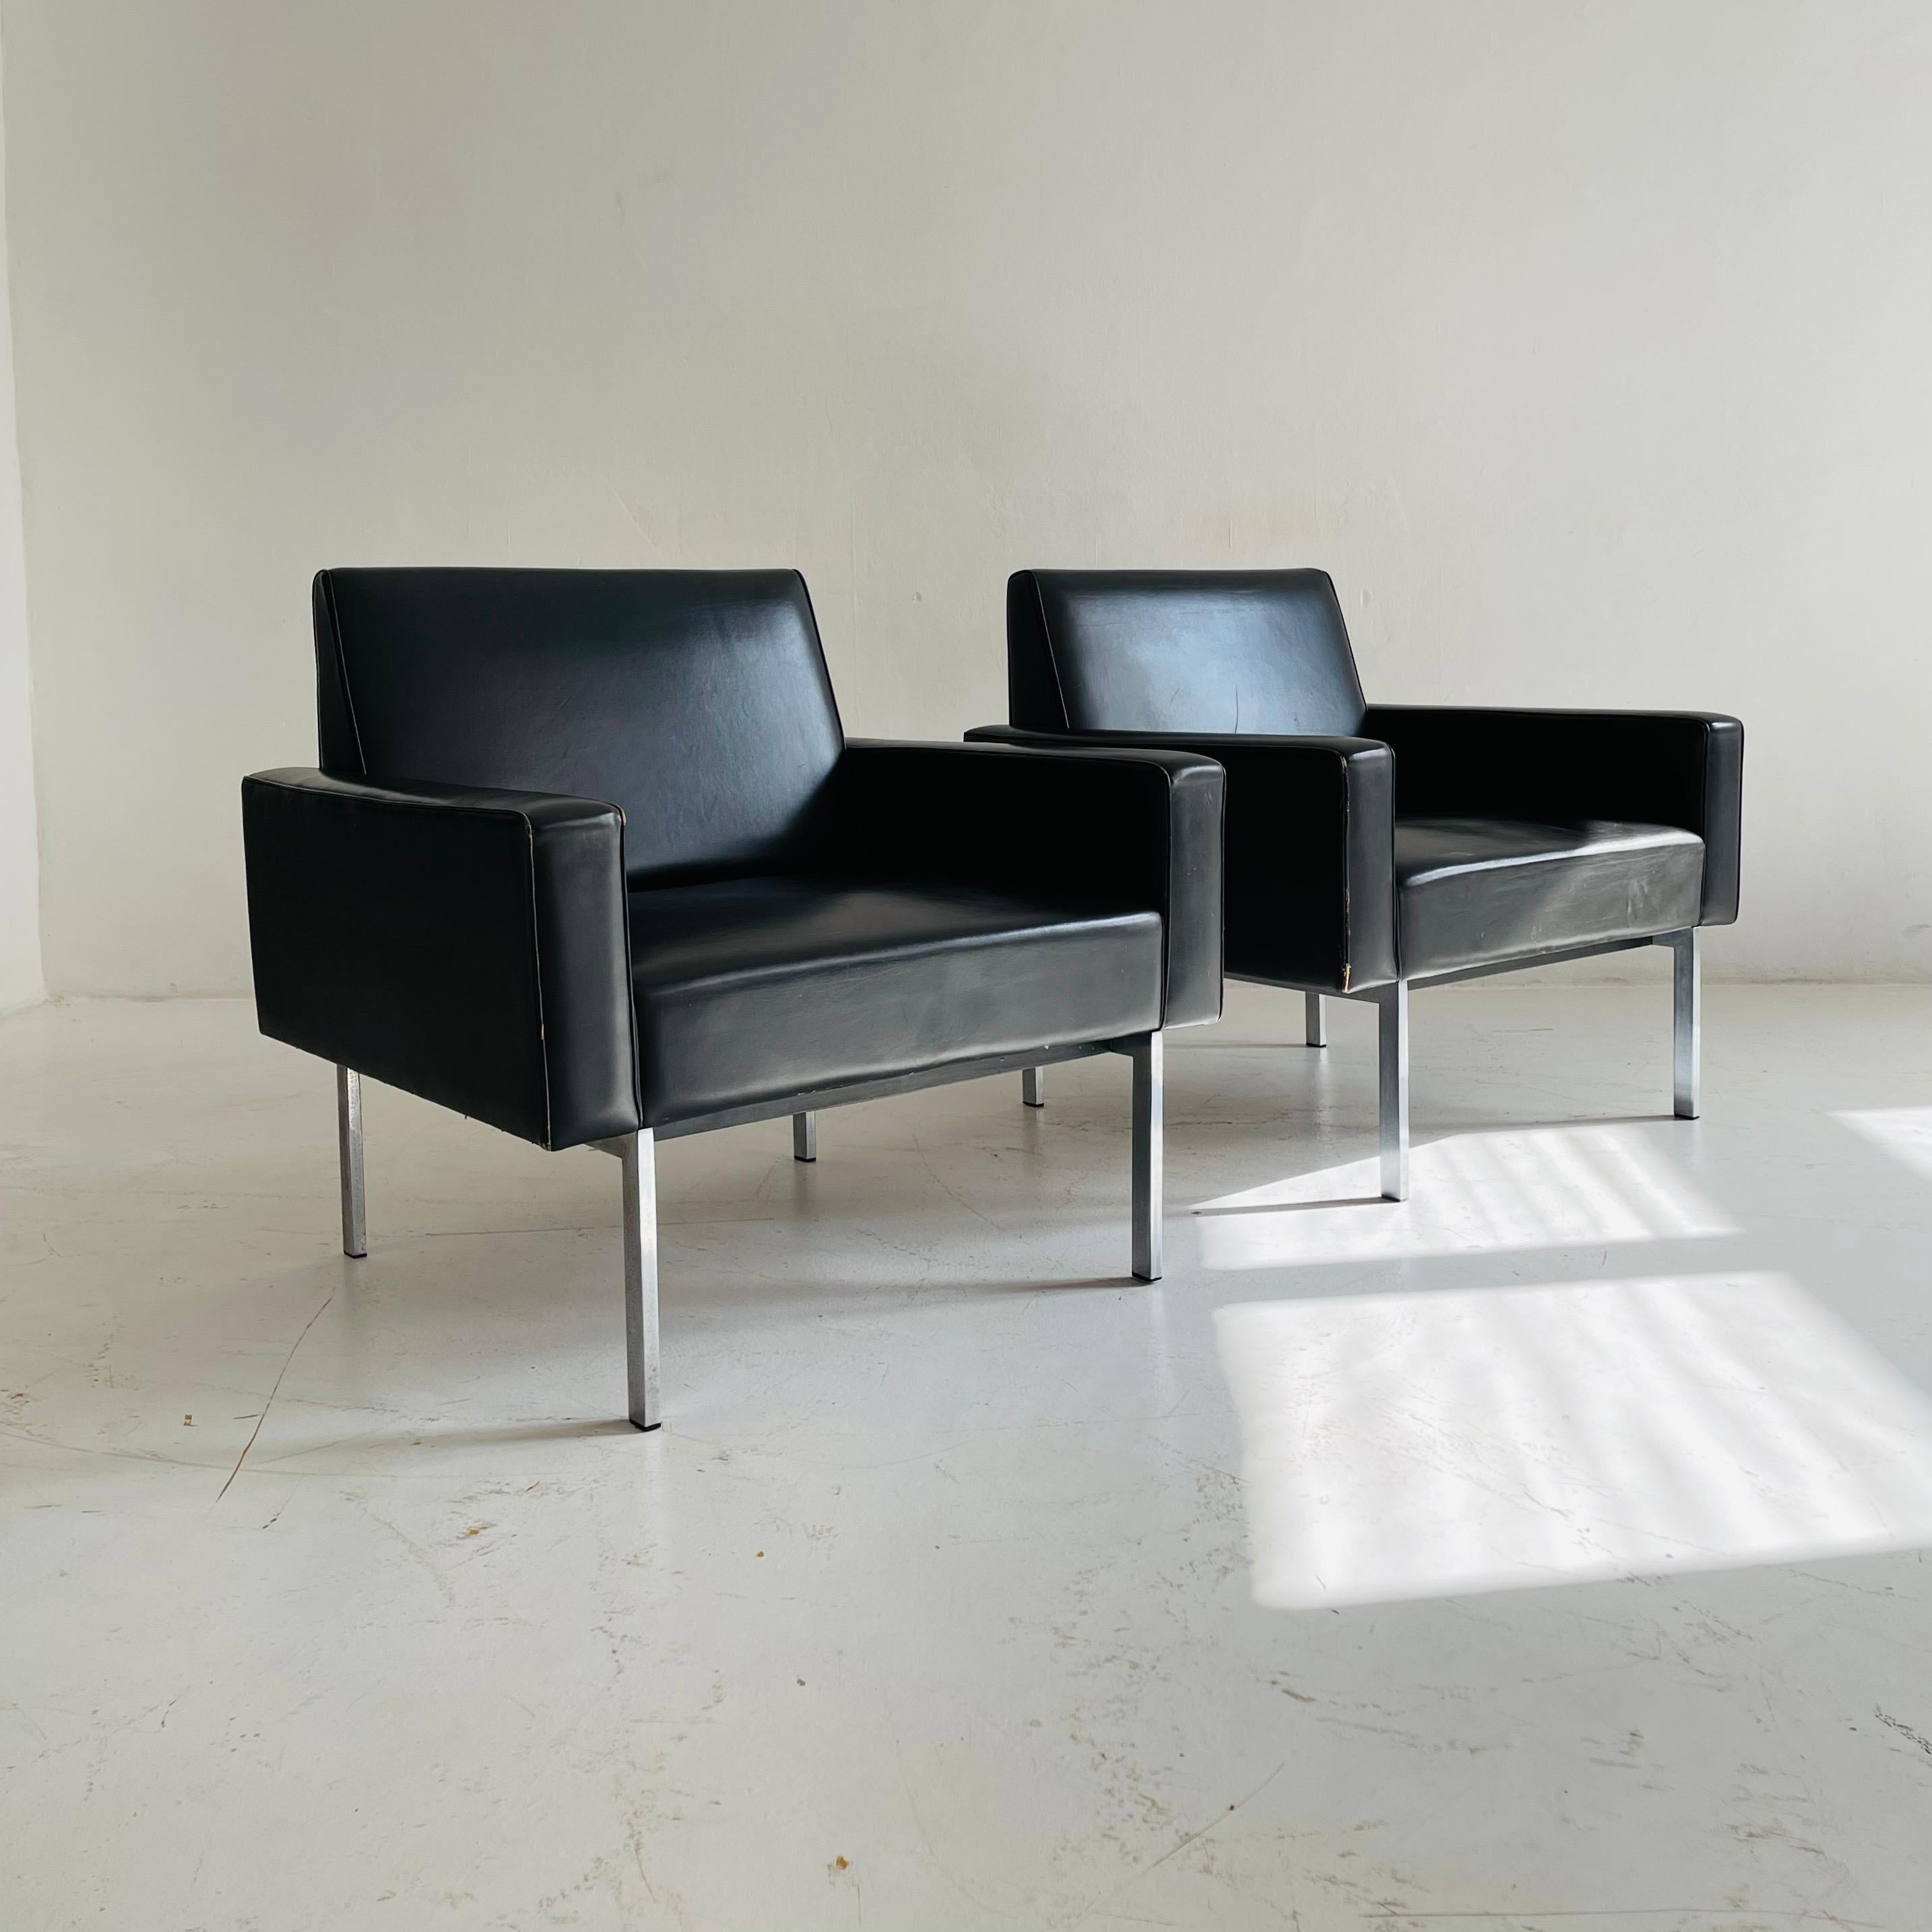 Austrian Patinated Leather Arm Lounge Chairs, Austria, 1960s For Sale